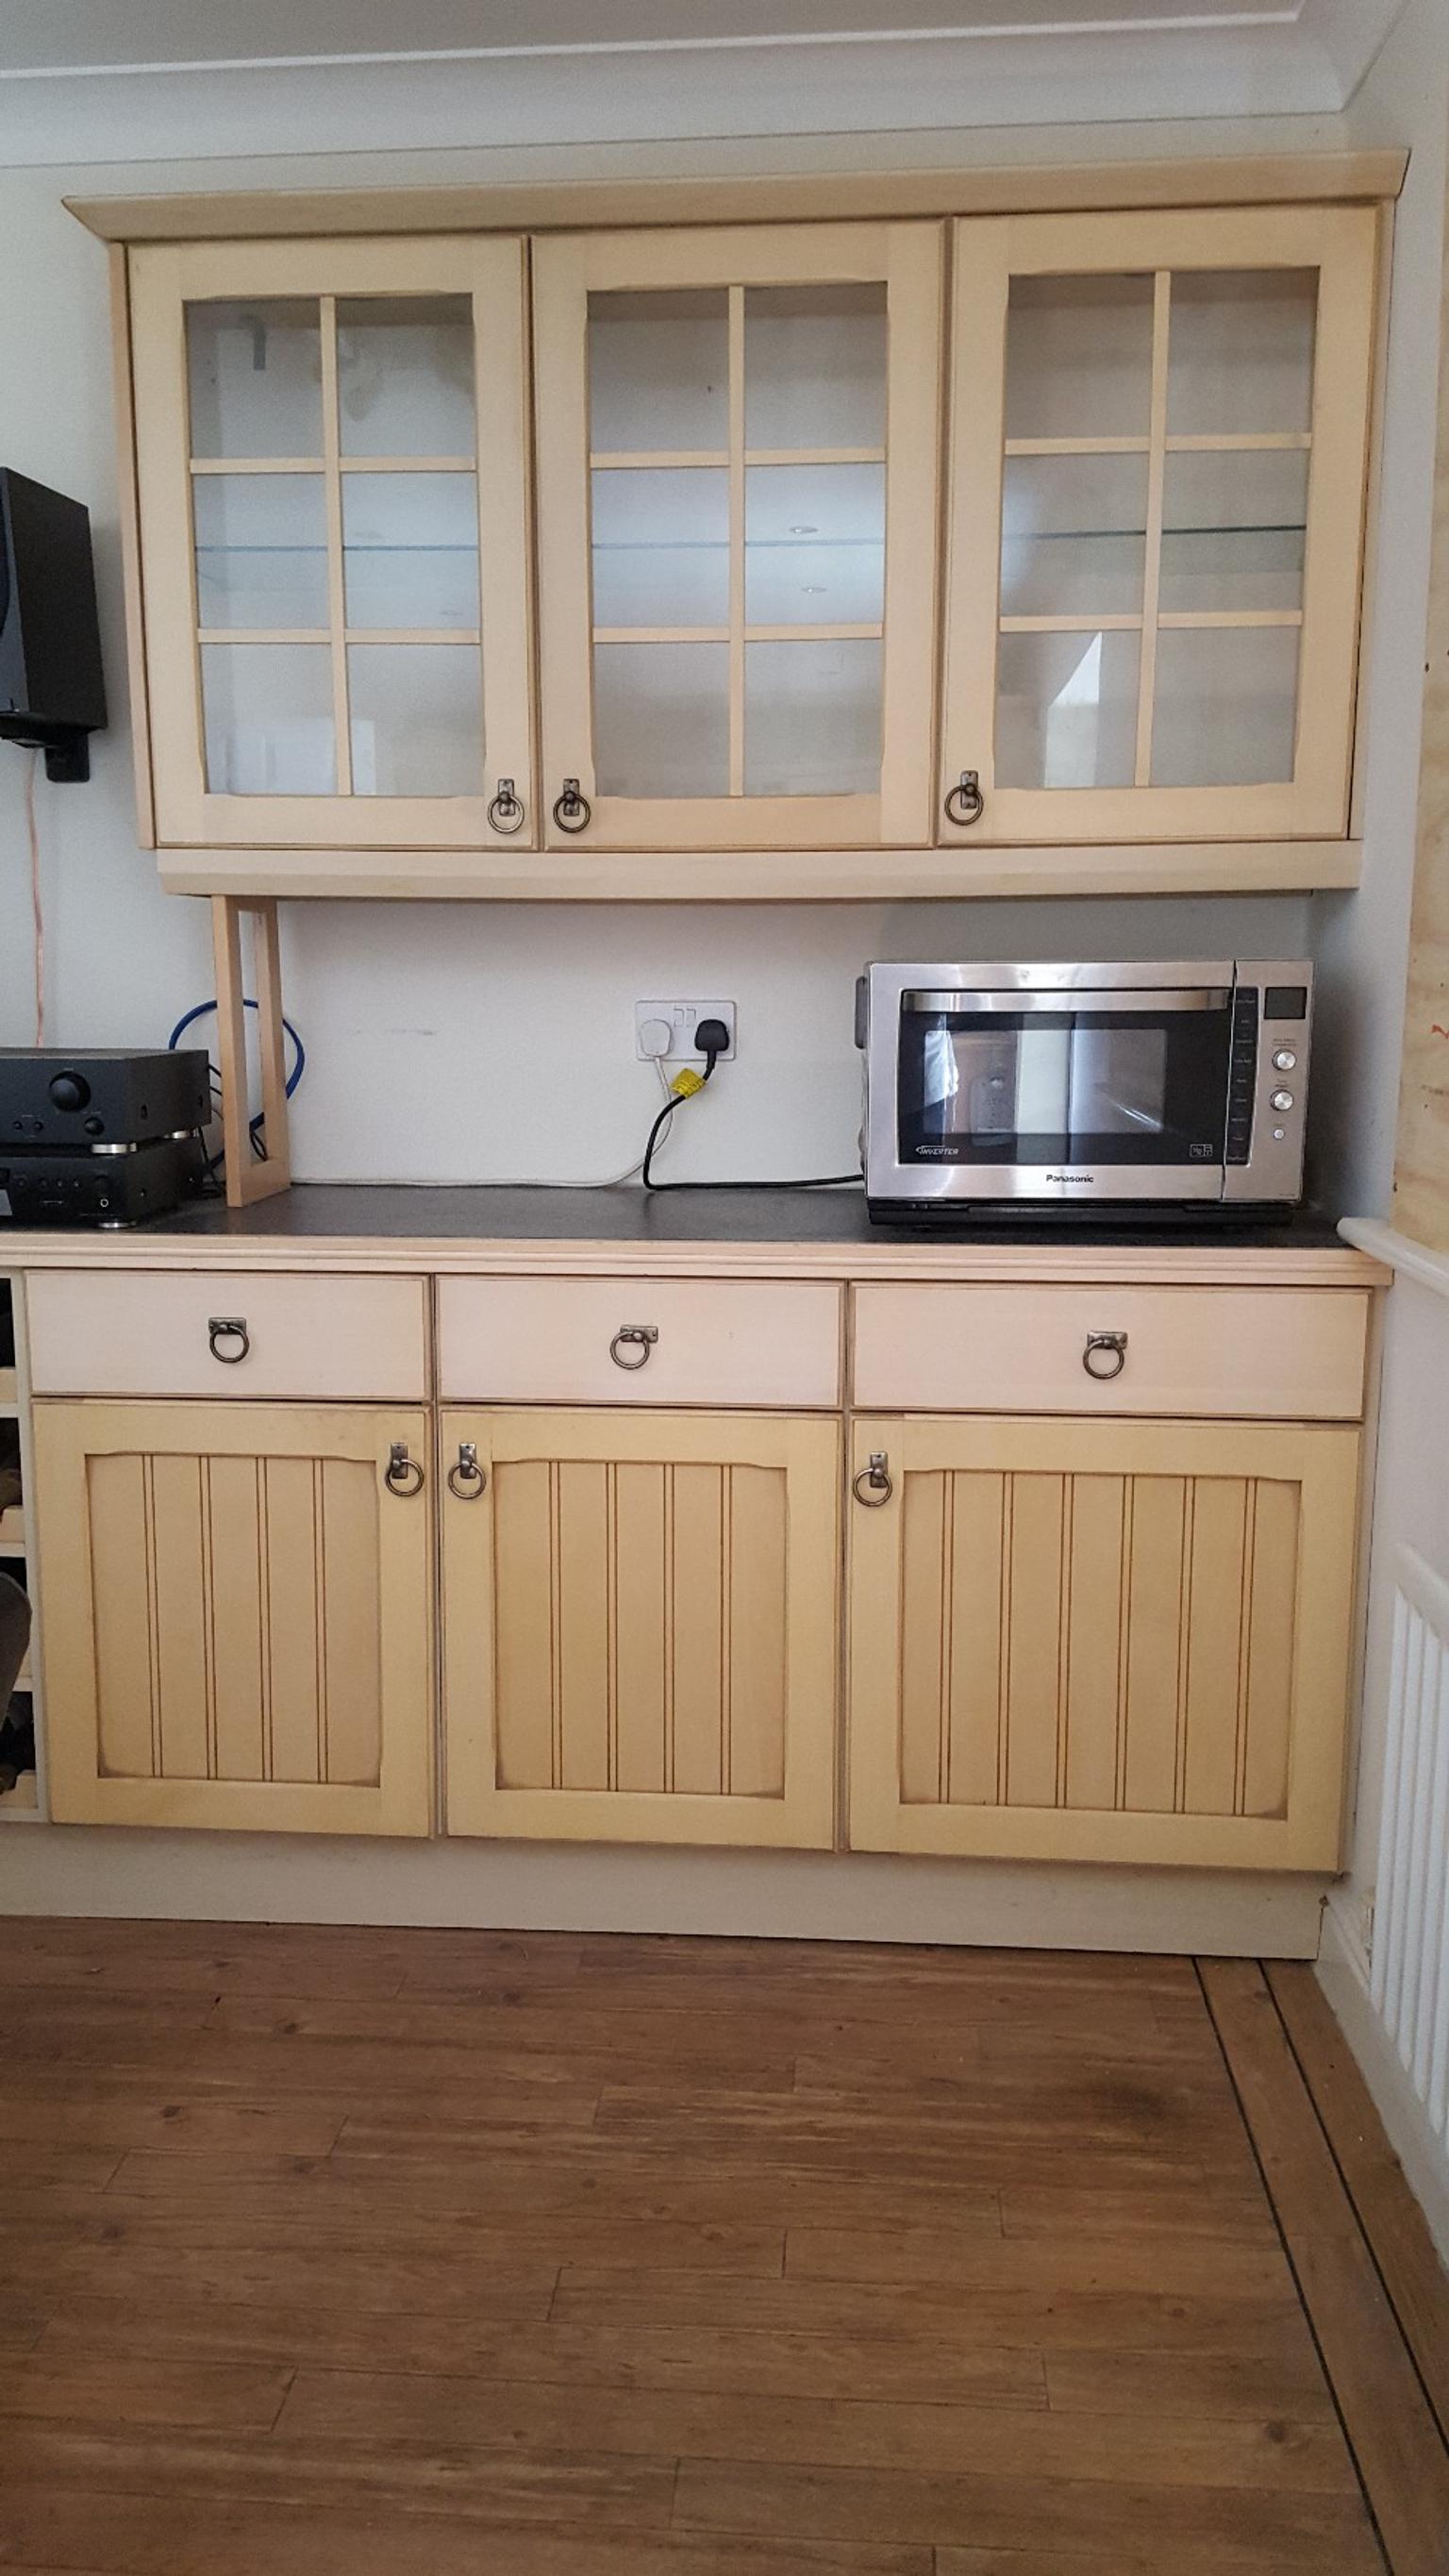 Kitchen Cabinets Units Used In Cv22 Rugby For 29500 For Sale